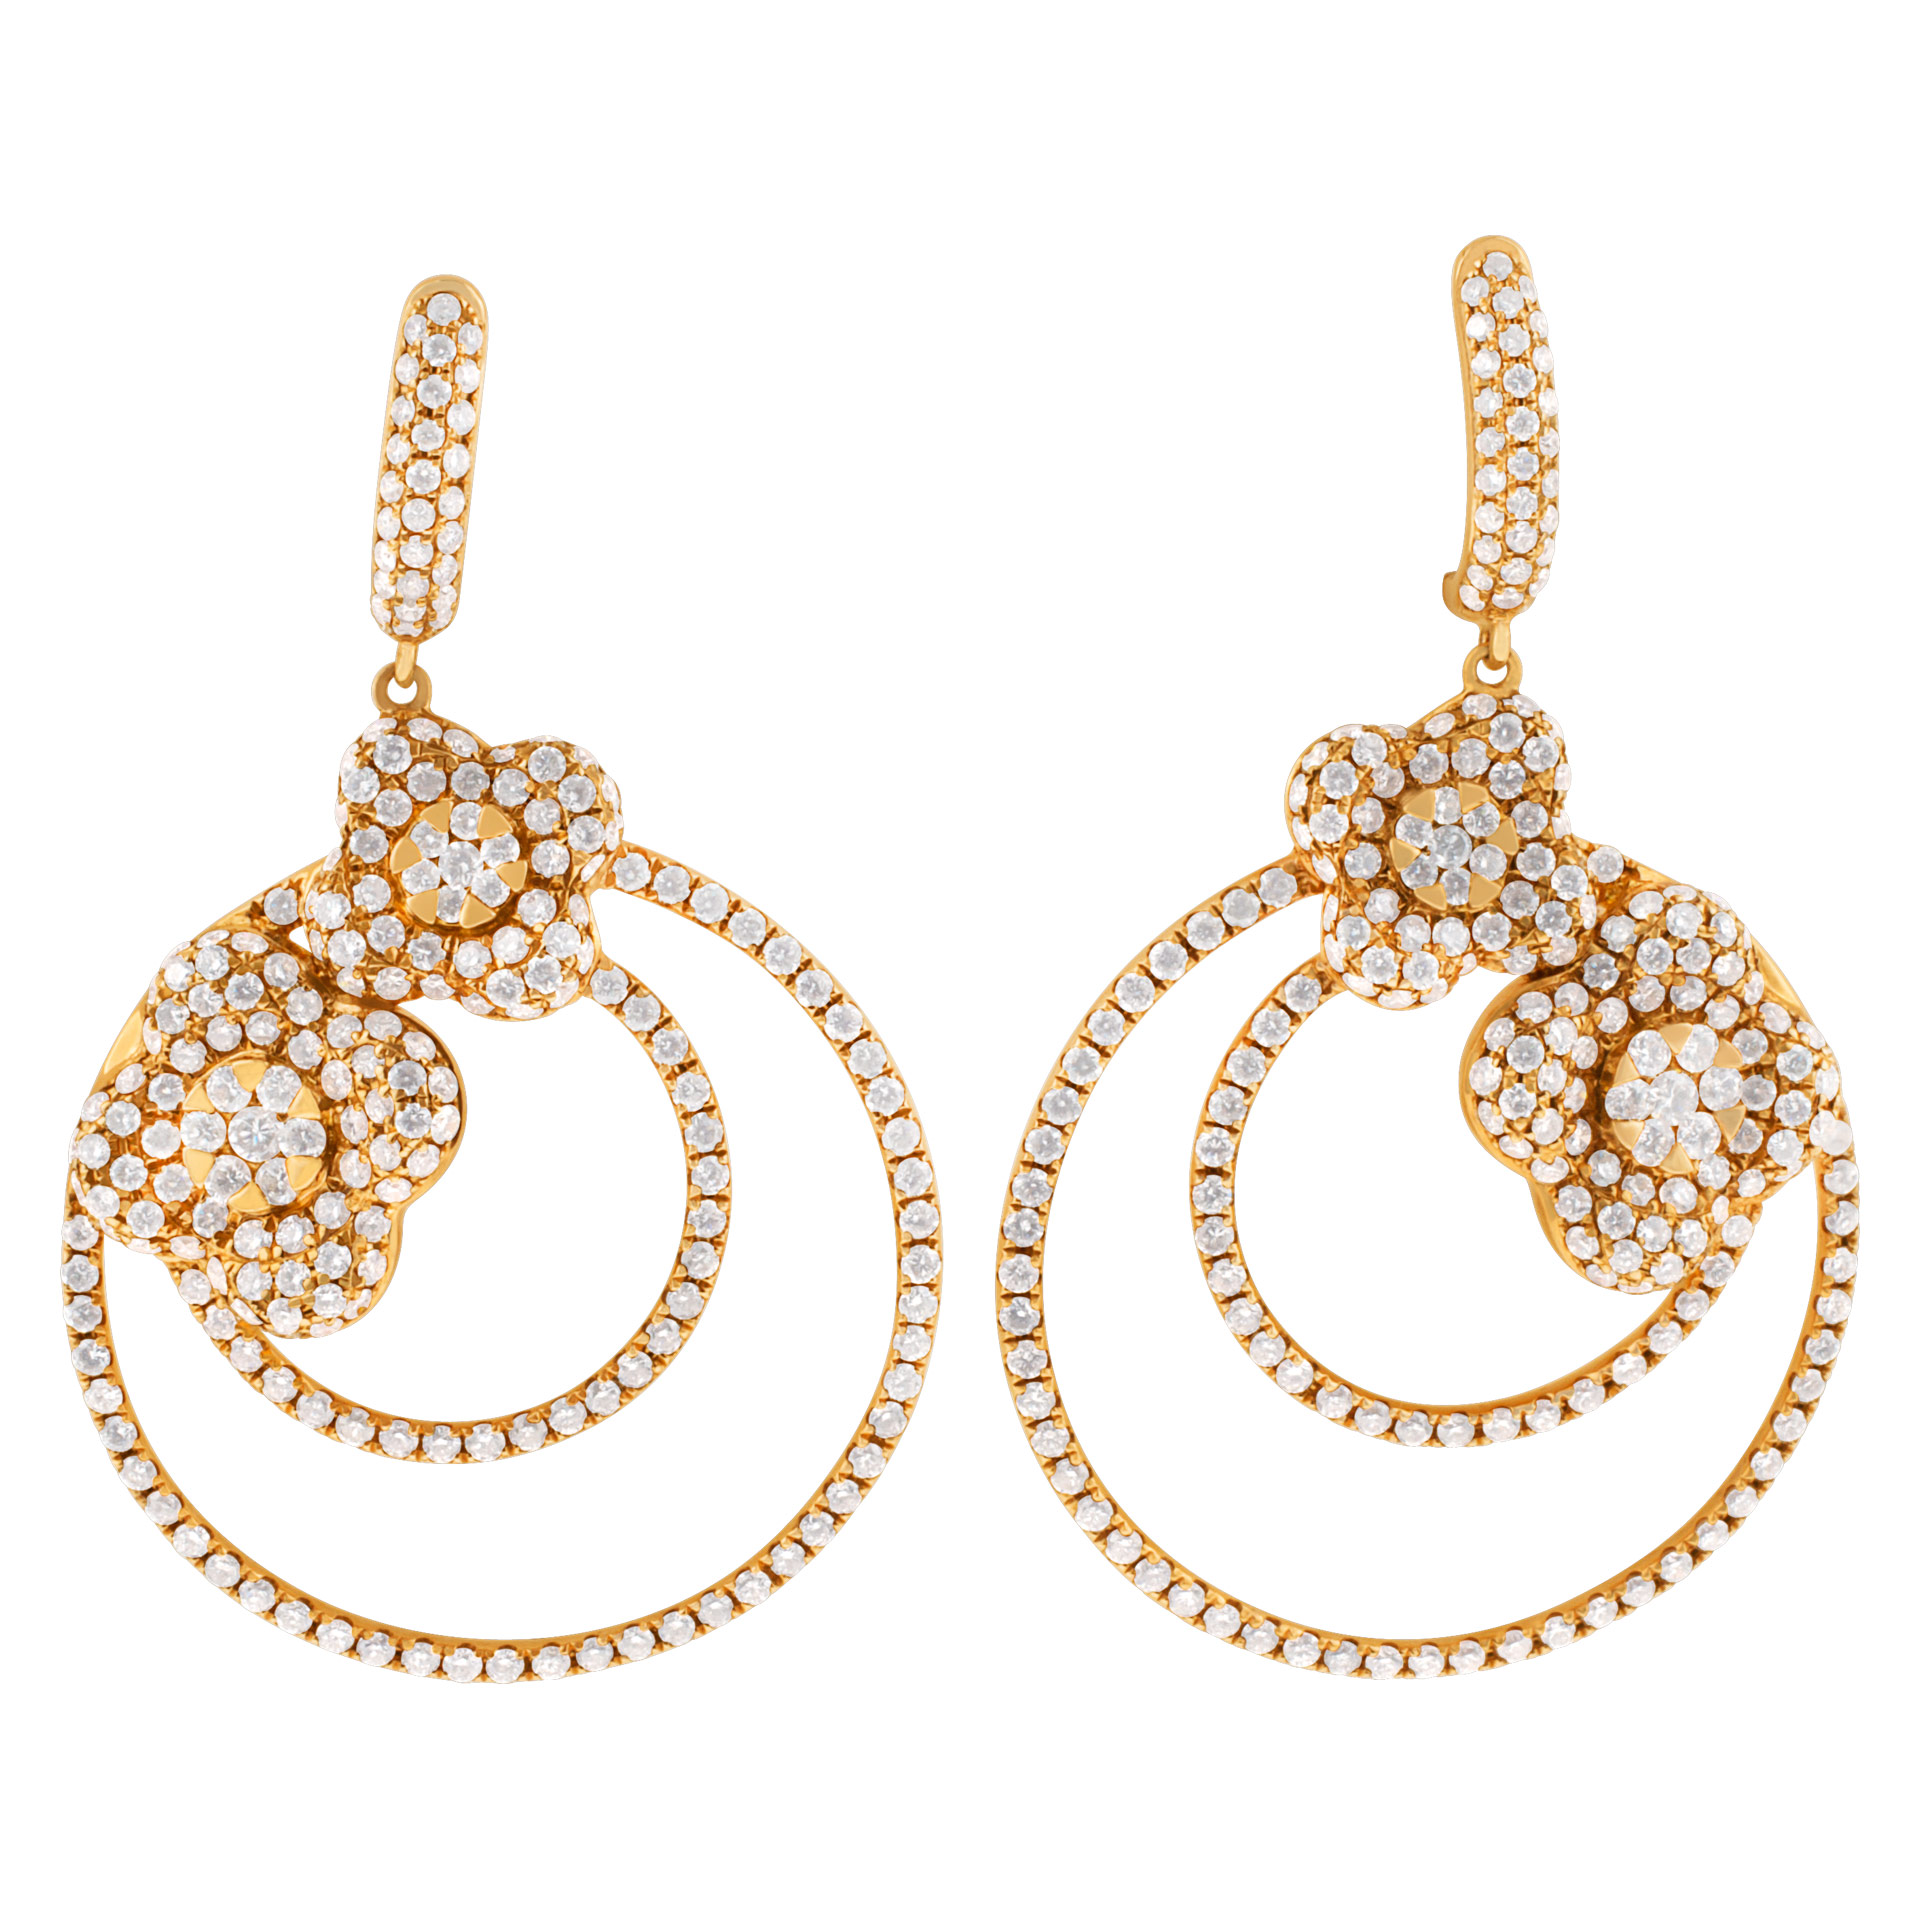 Glamorous drop diamond earrings in 18K rose gold with approx. 5.71 carats image 1